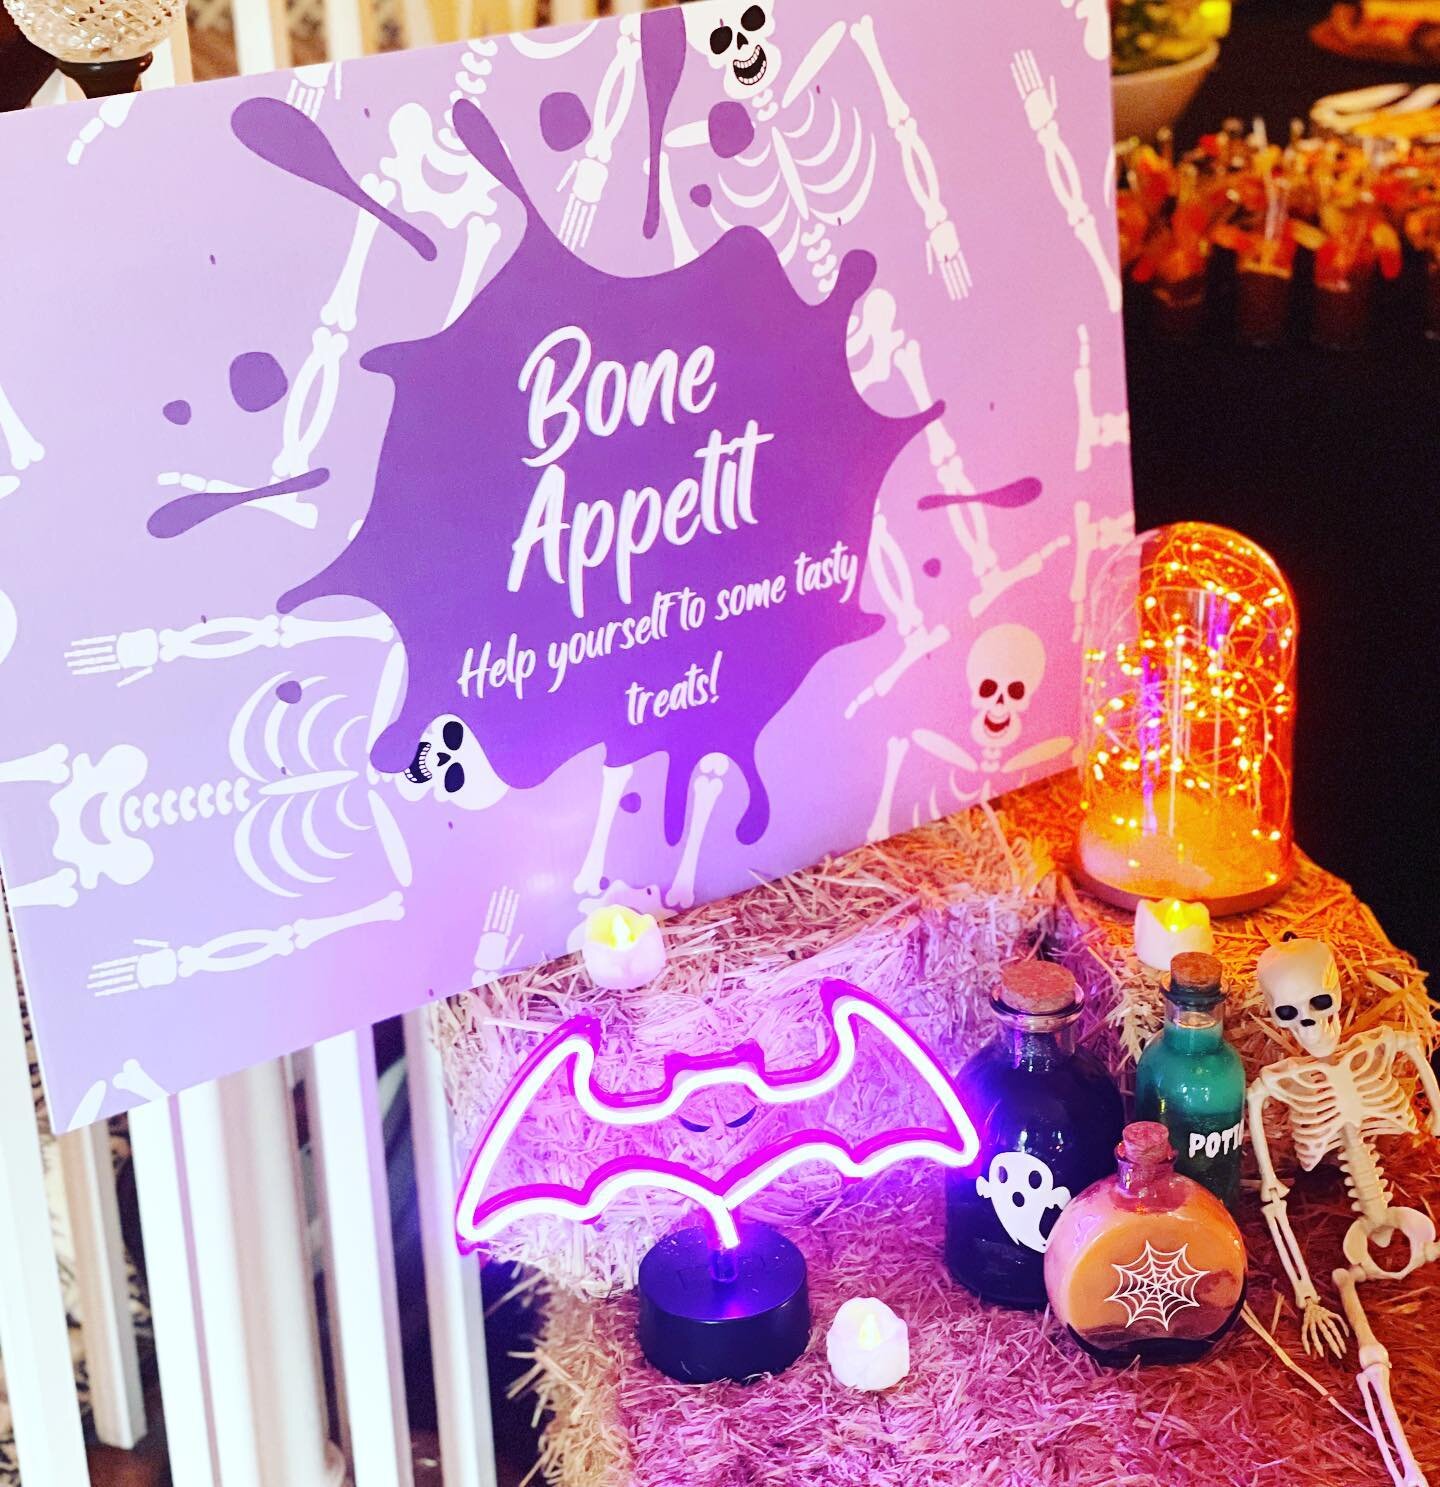 We love hittin&rsquo; the punny bone&hellip; 🦴💀

(Nailed it, again! 😂)

#halloween #punny #puns #party #events #decor #inspo #design #inspiration #kids